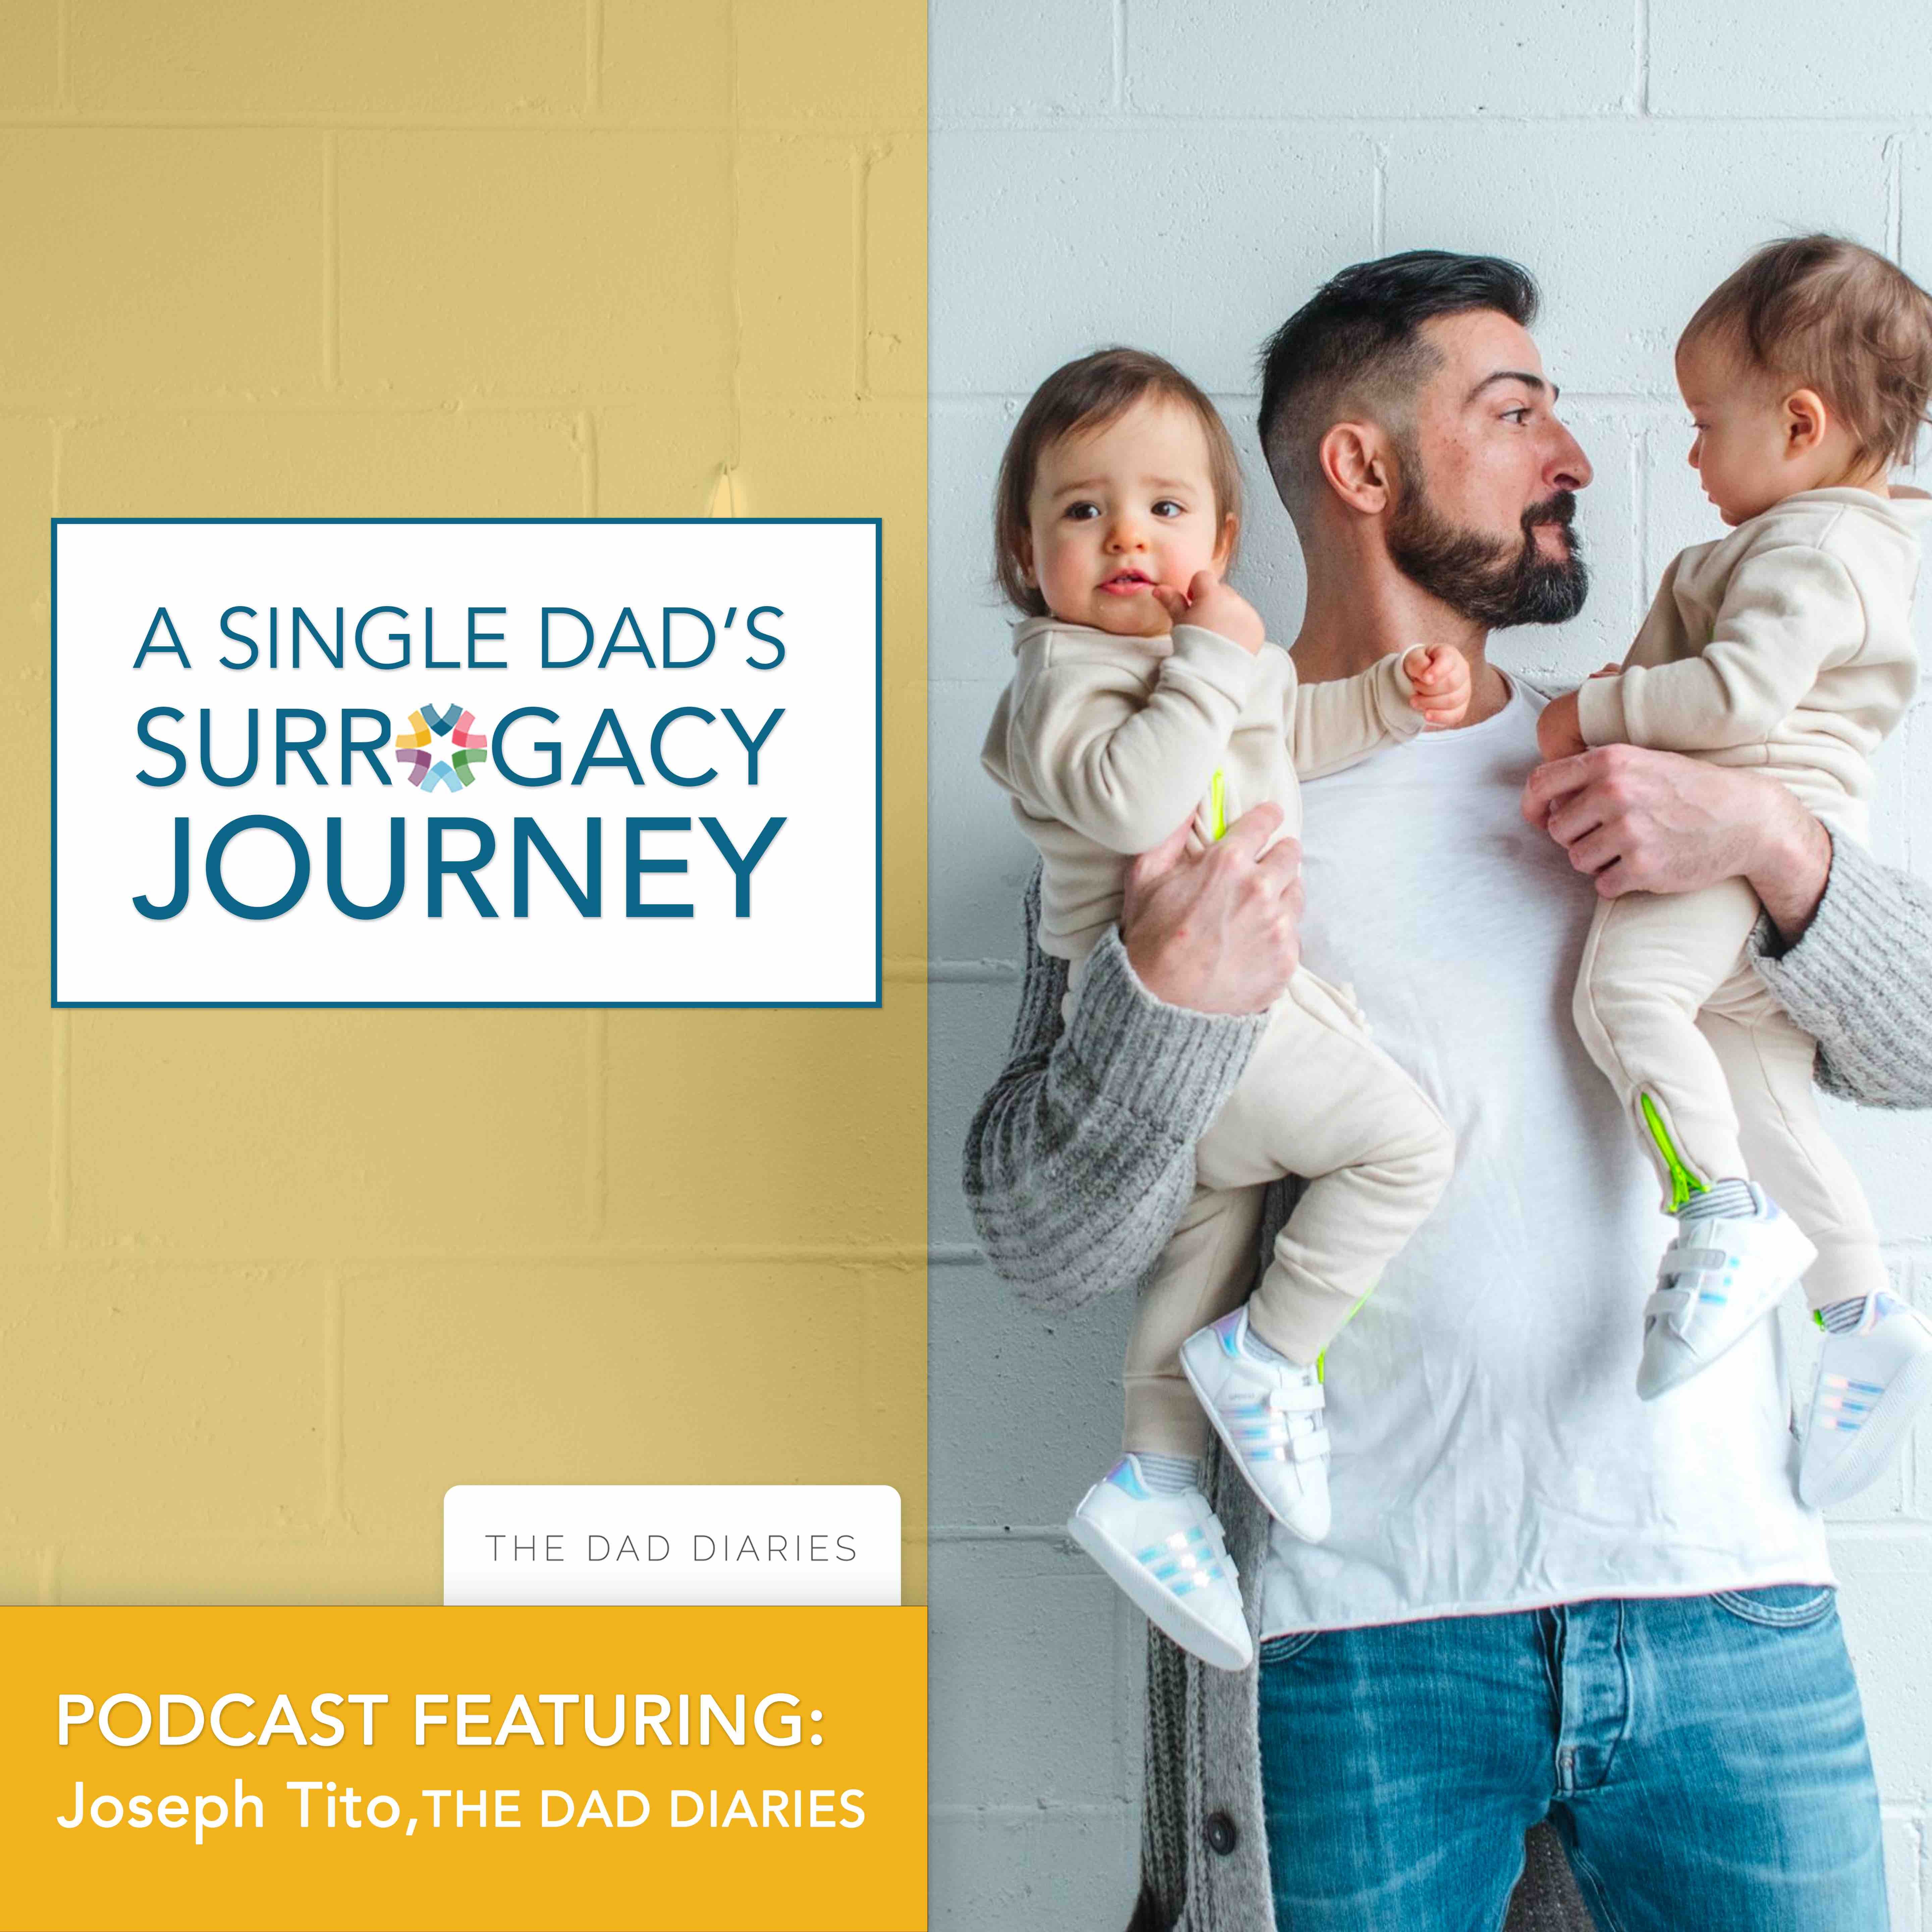 Joseph Tito of The Dad Diaries shares his surrogacy journey as a single gay man